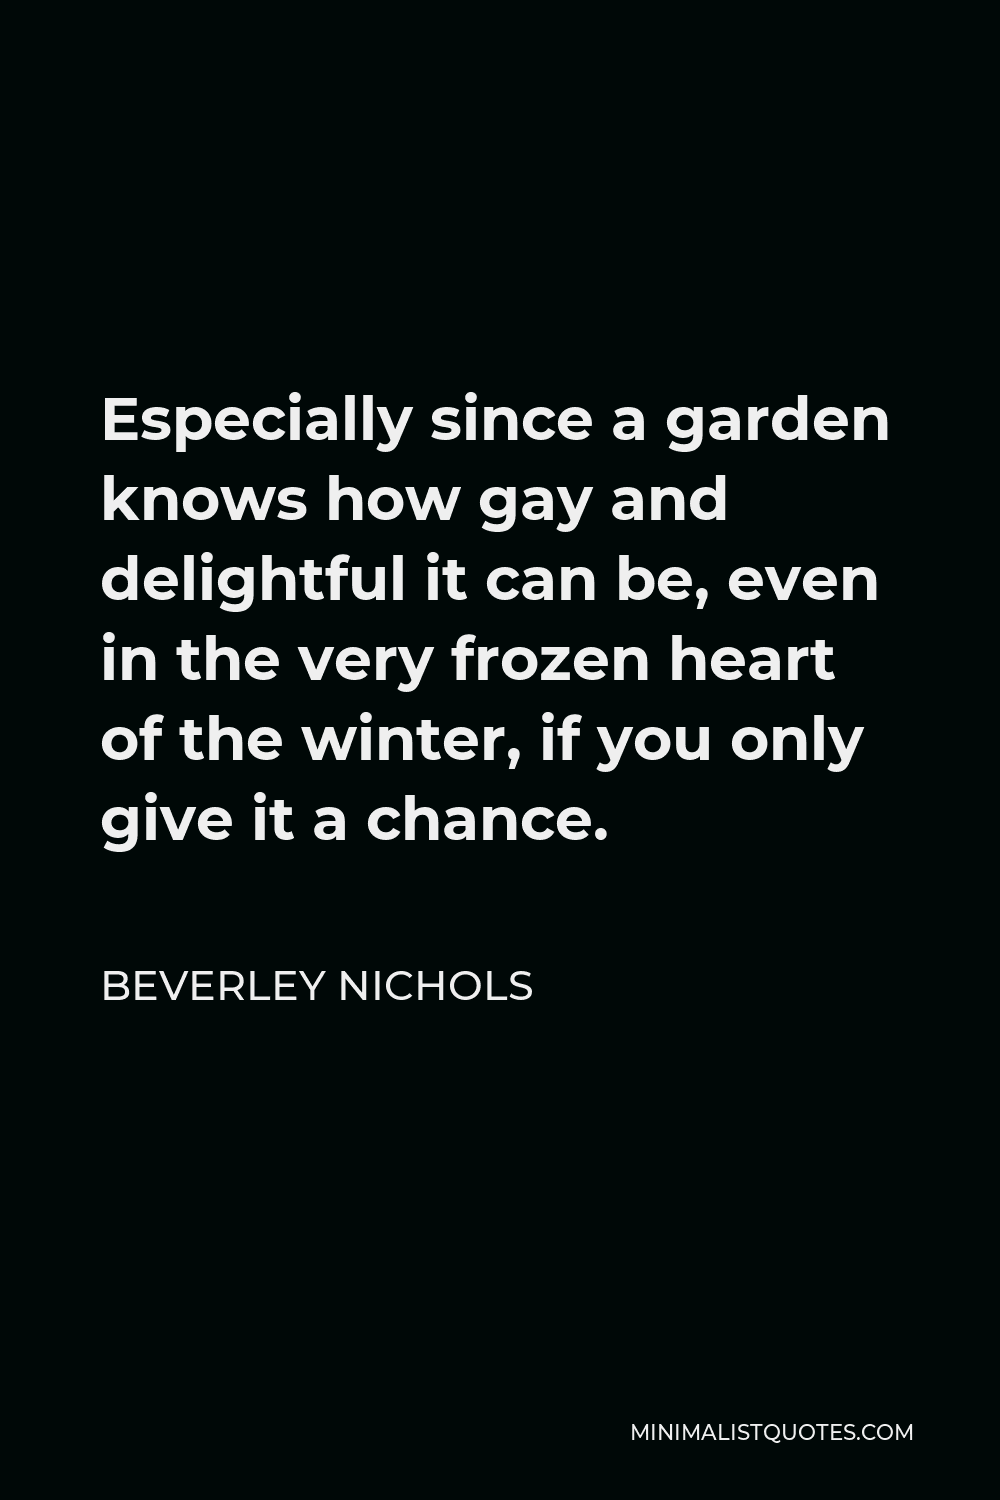 Beverley Nichols Quote - Especially since a garden knows how gay and delightful it can be, even in the very frozen heart of the winter, if you only give it a chance.